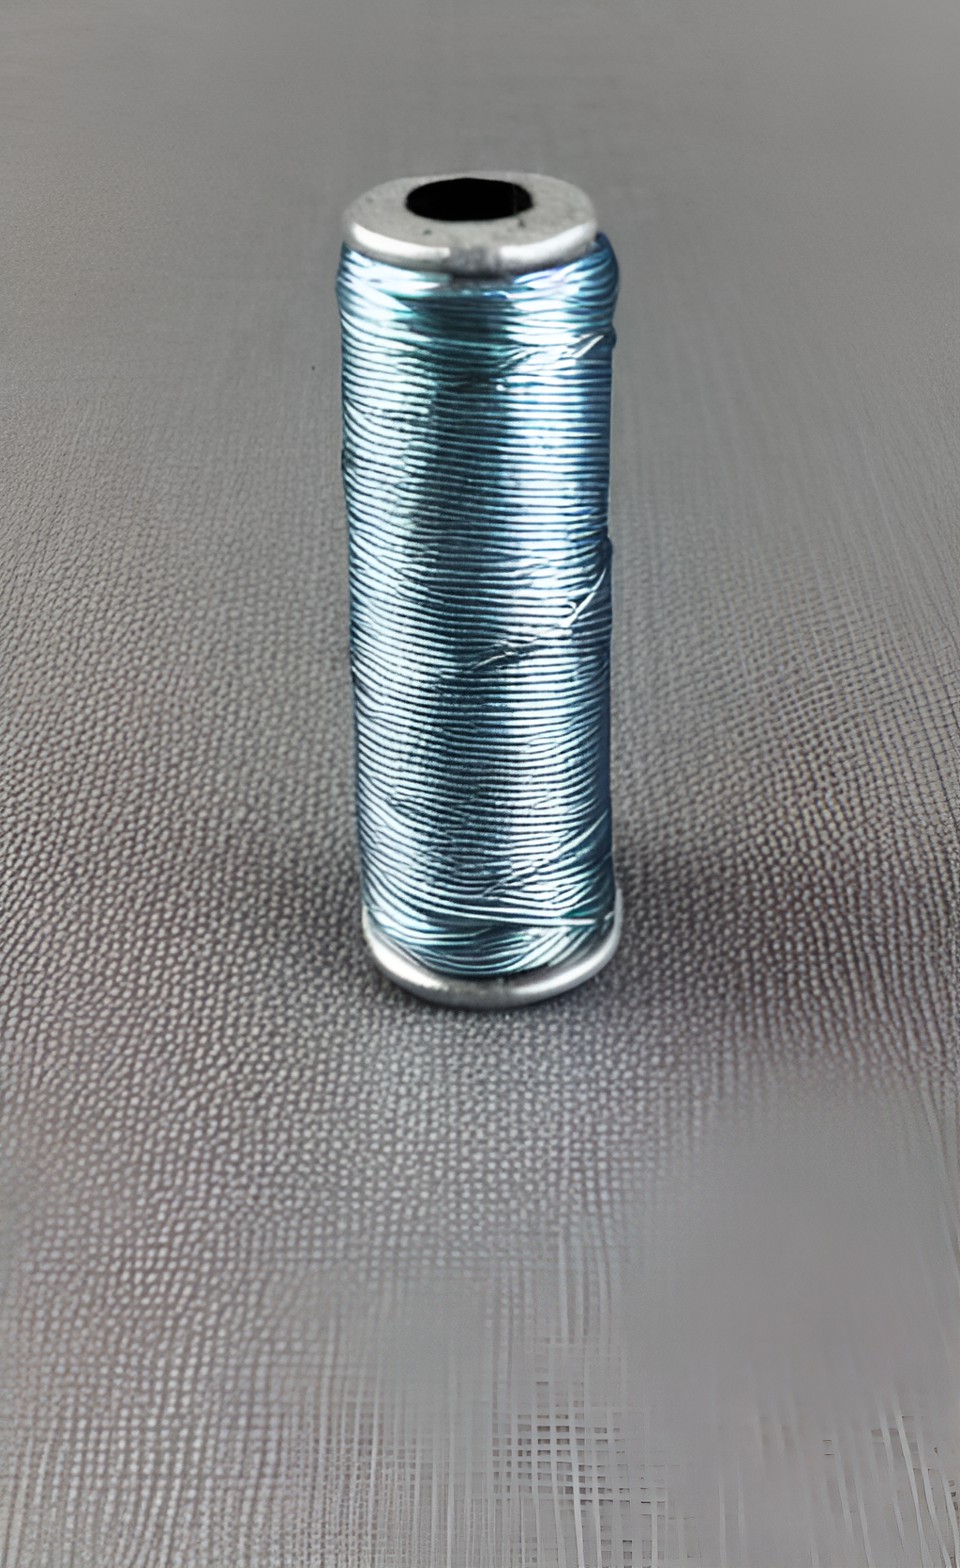 24 Gauge Stainless Steel Wire for Jewelry Making, Bailing Wire